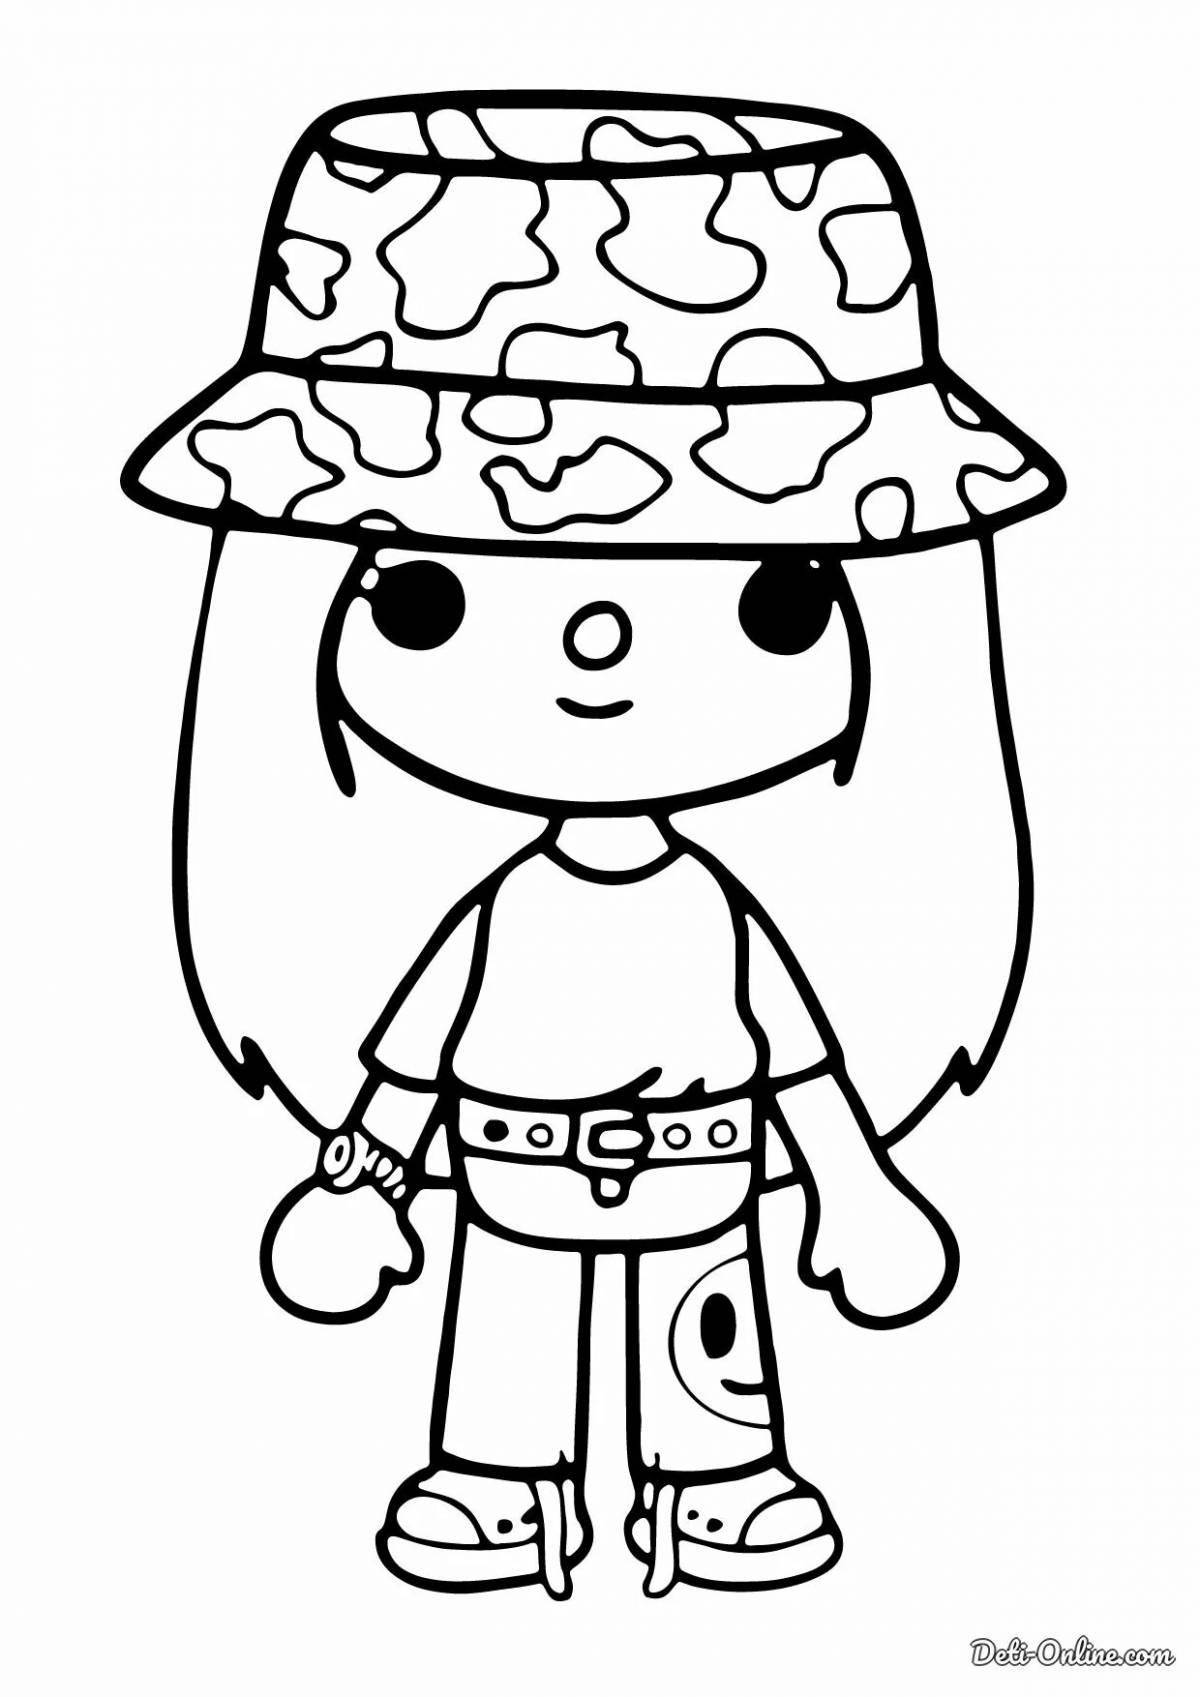 Current side body coloring page charm